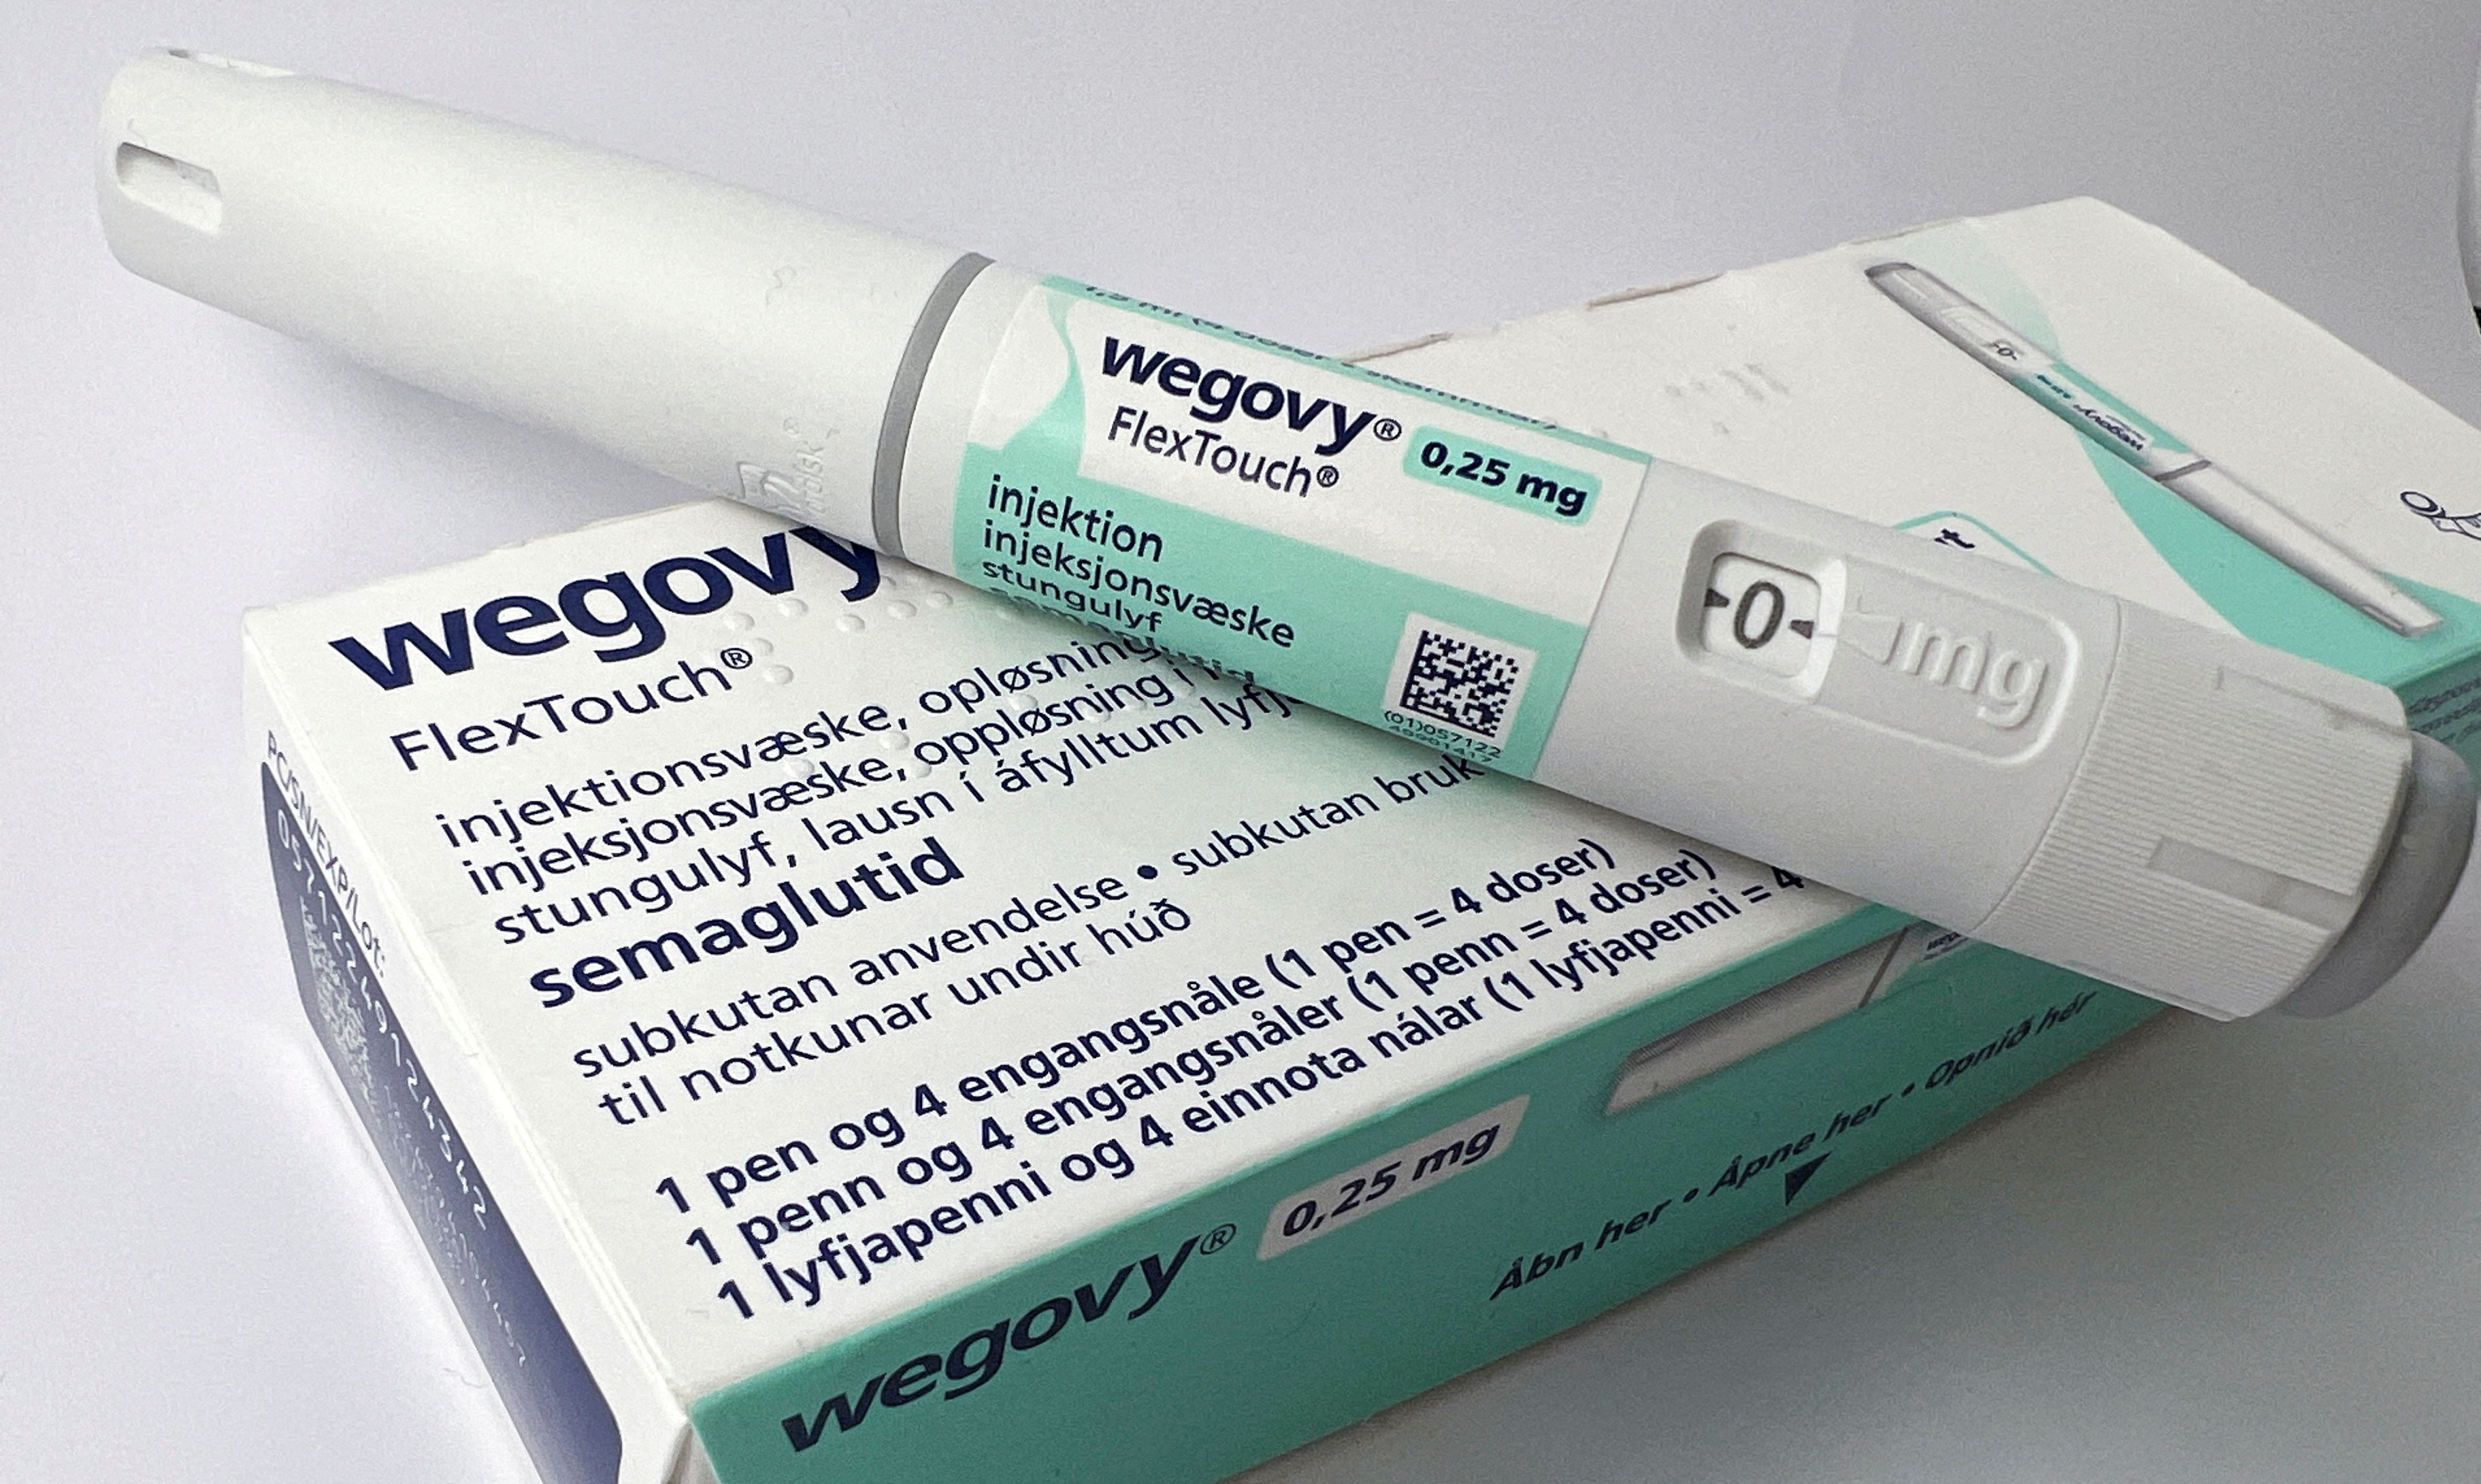 This photo illustration from Oslo shows an injection pen for Novo Nordisk's weight loss drug Wigoby